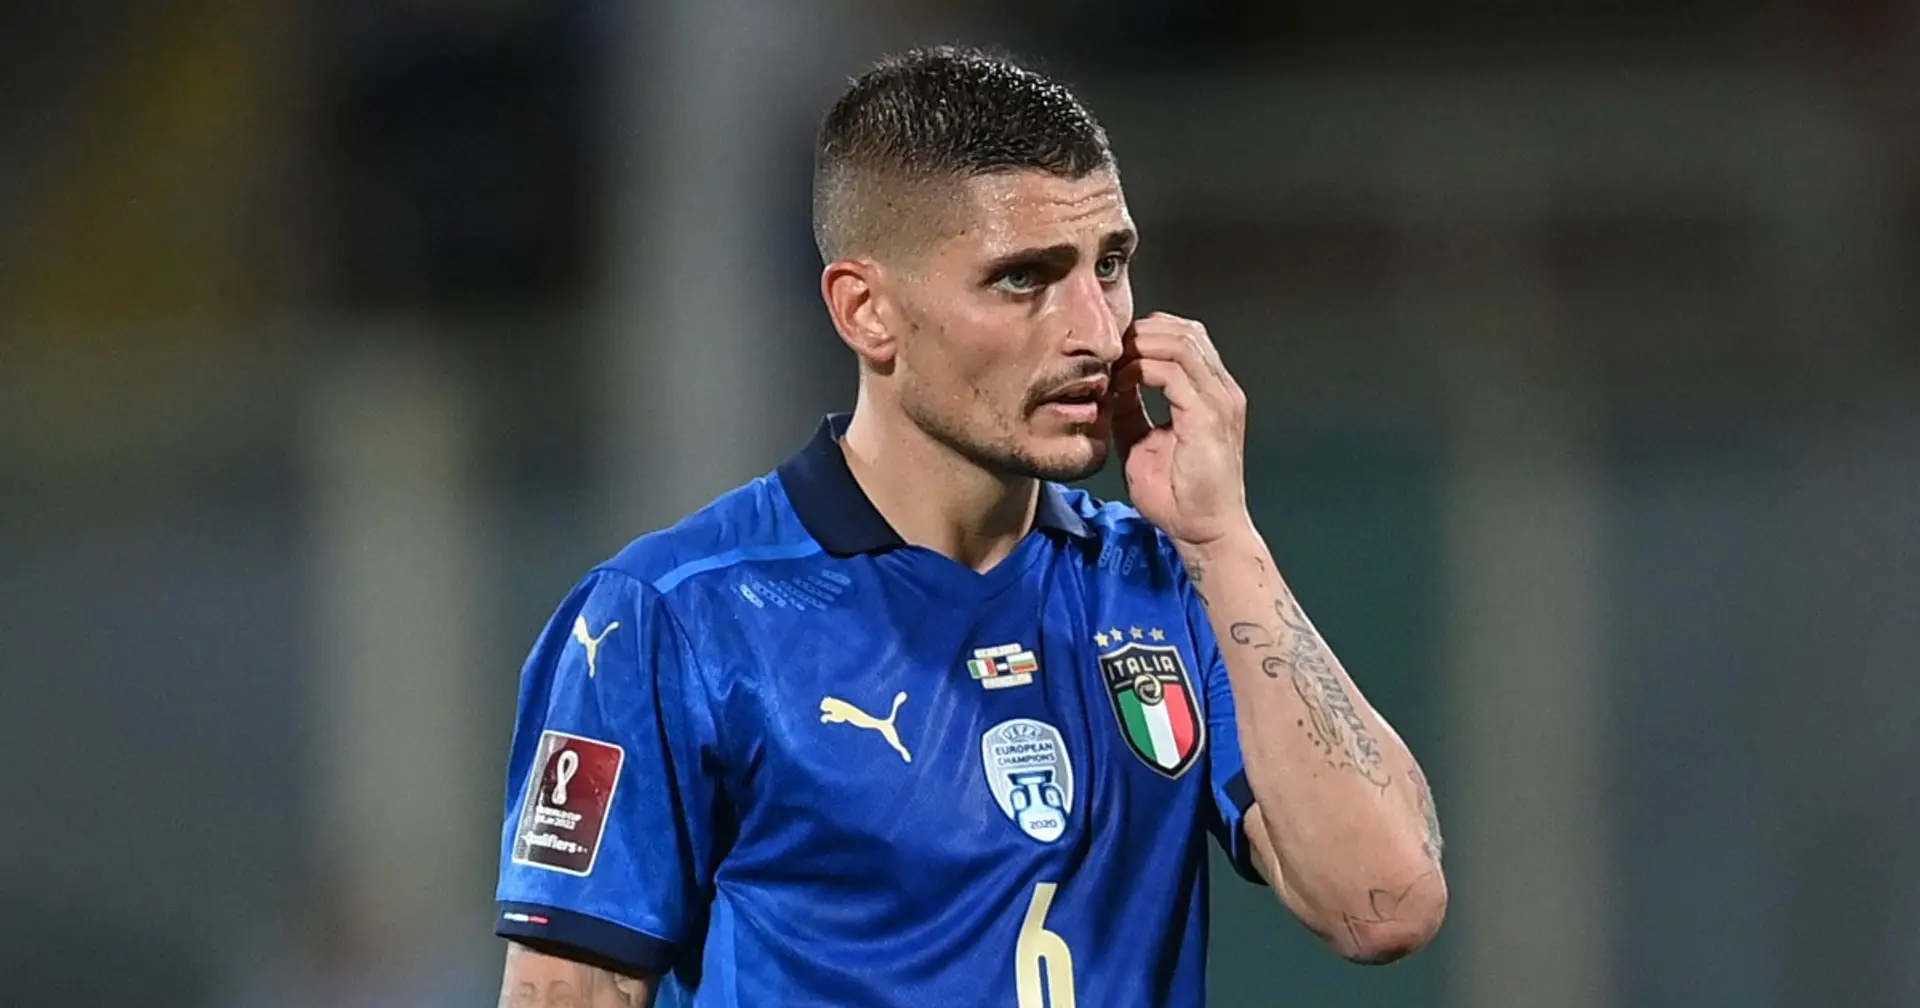 Verratti leaves Italy national team early due to knee discomfort